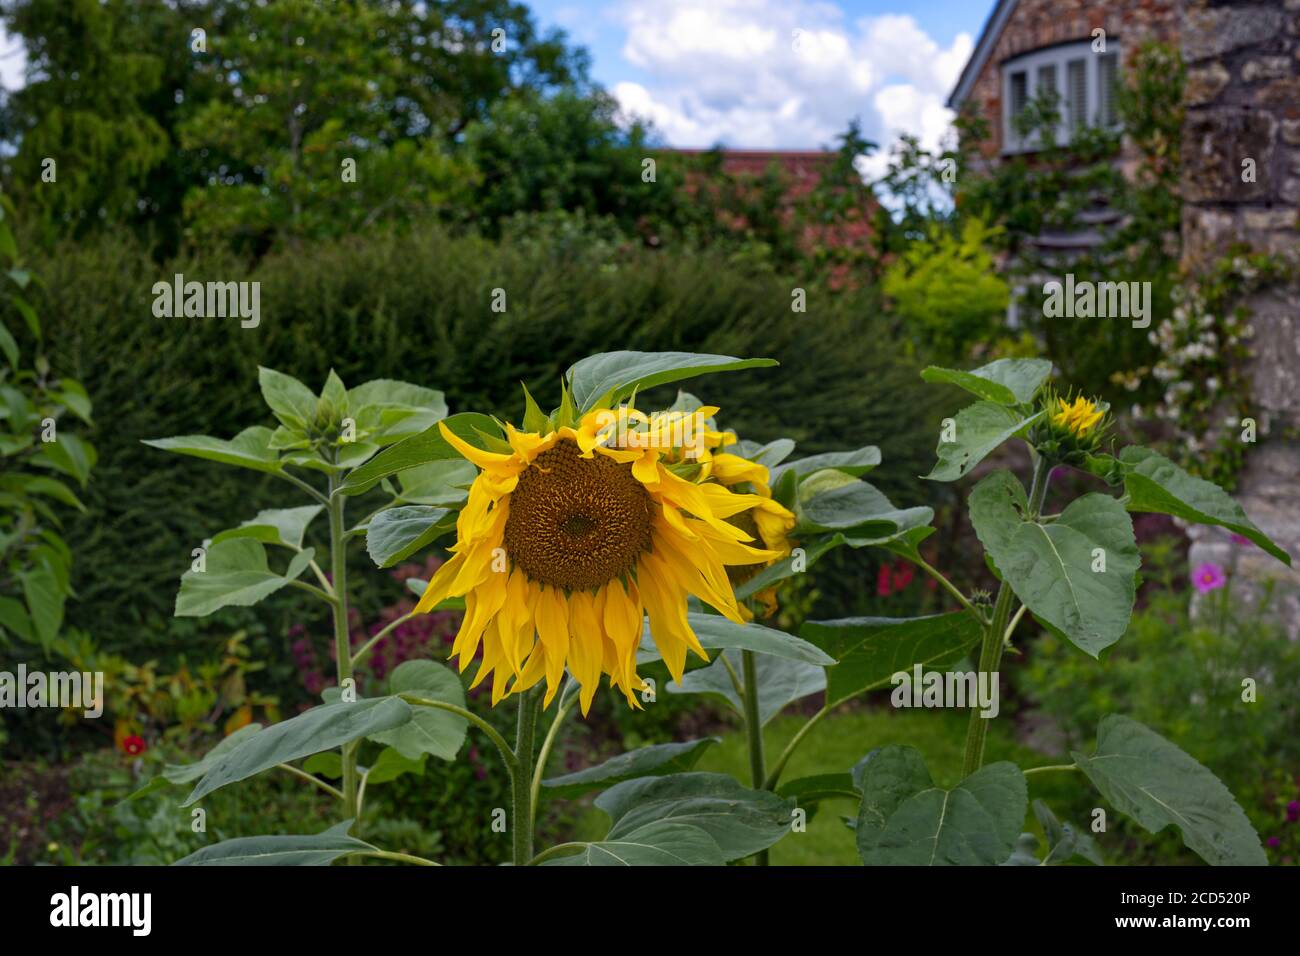 Sunflowers(Helianthus Annus) in a residential garden at the village of Dulcote, Somerset,UK Stock Photo